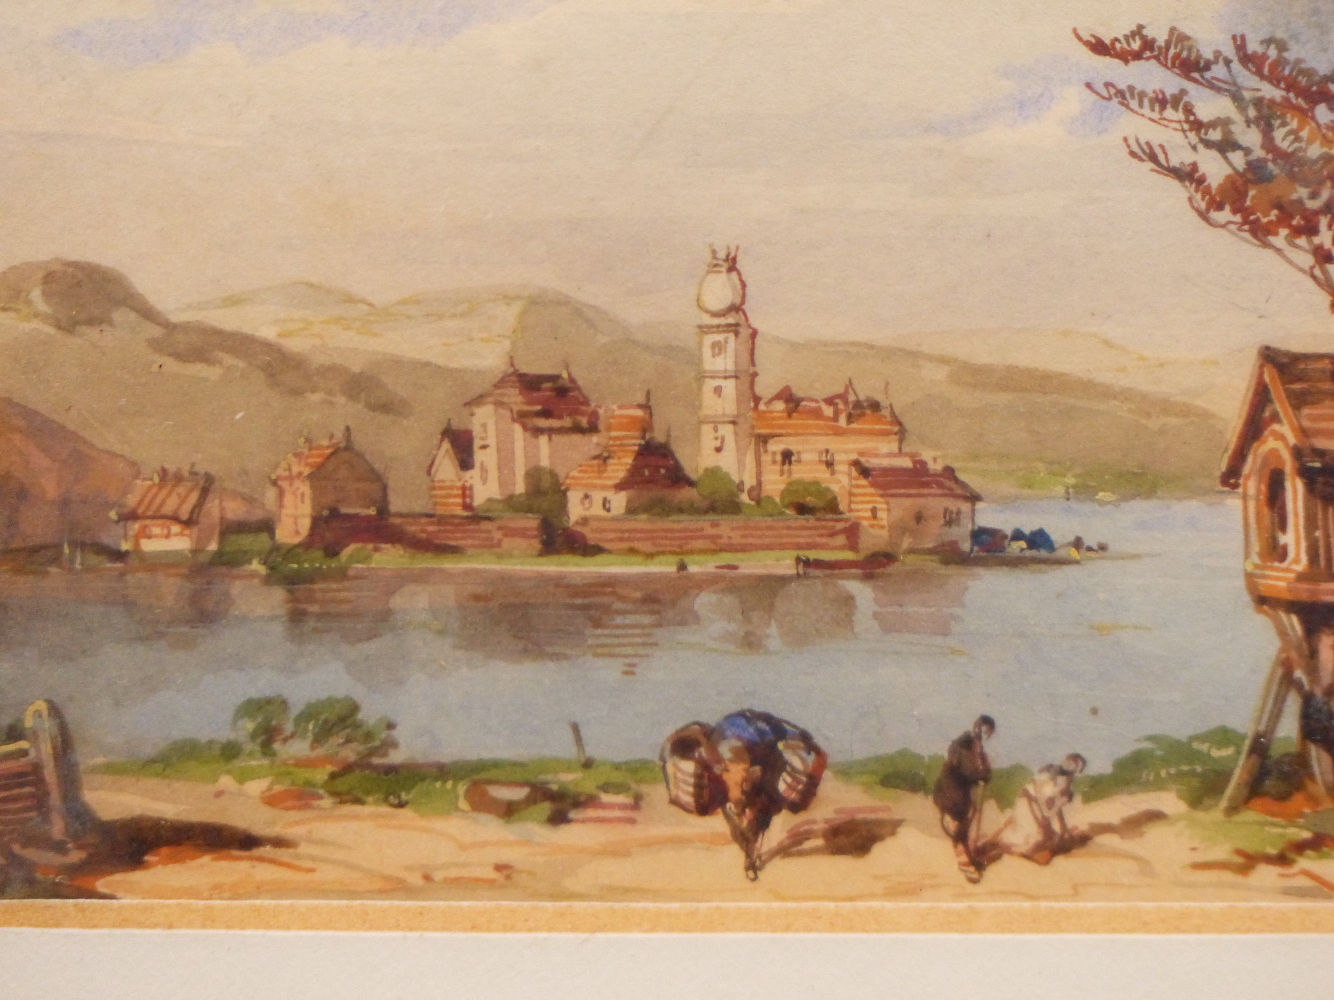 ATTRIBUTED TO JAMES DUFFIELD HARDING (1798-1863) WASSERBURG, FIGURES BY A LAKE IN A MOUNTAINOUS - Image 2 of 6